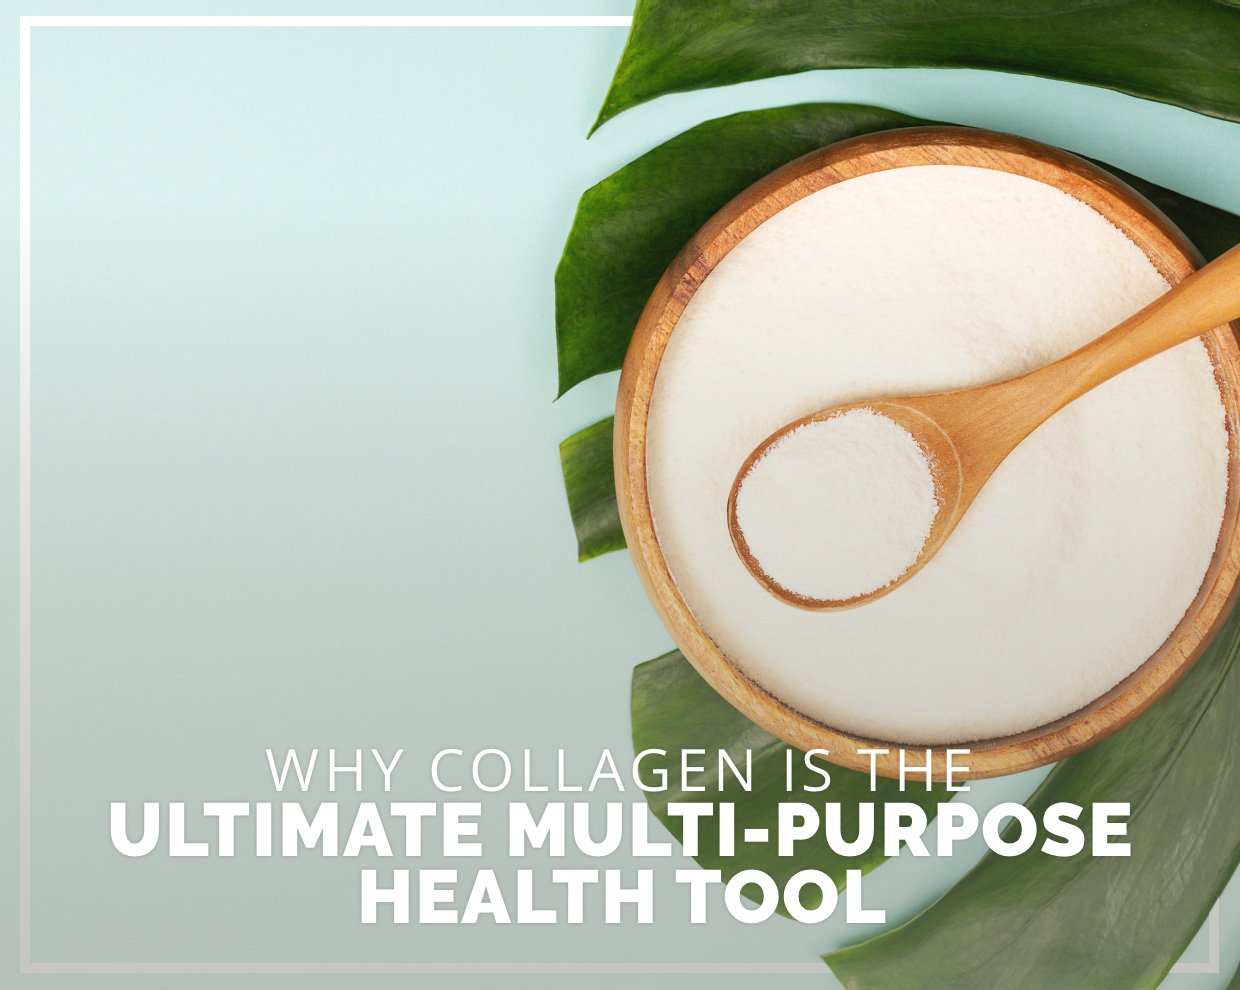 Why Collagen is the Ultimate Multi-Purpose Health Tool.